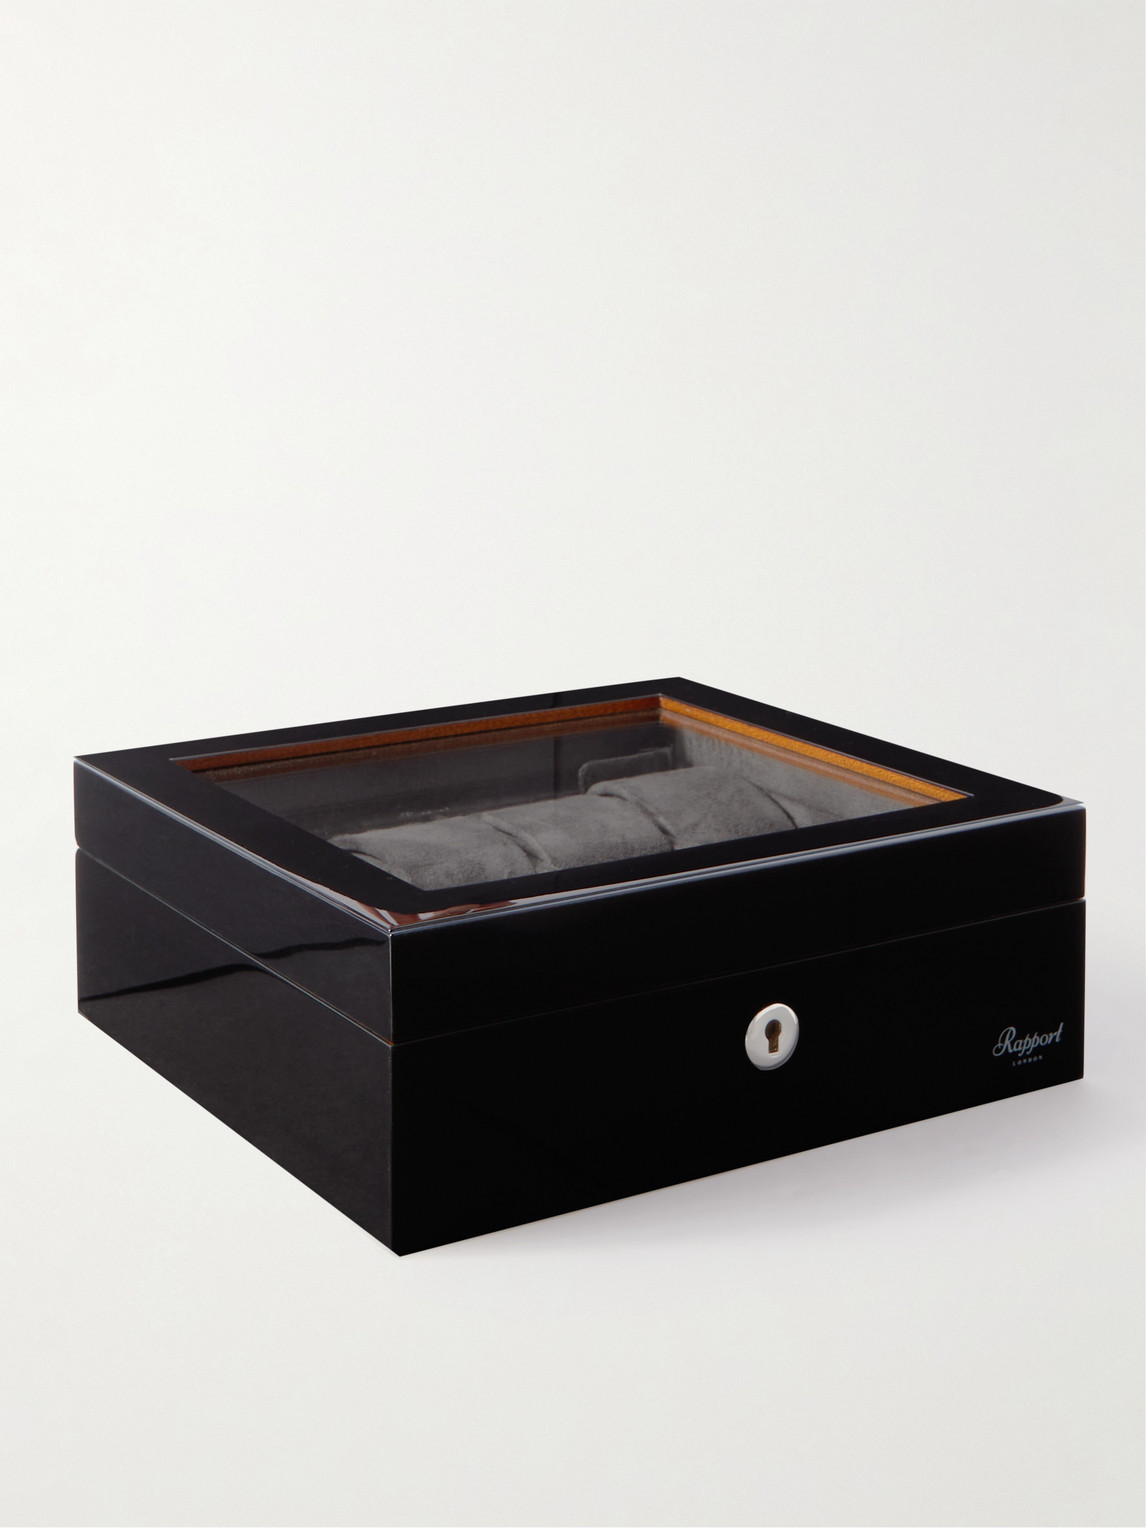 Rapport London Optic 8 Lacquered Cedar Watch Box In Black